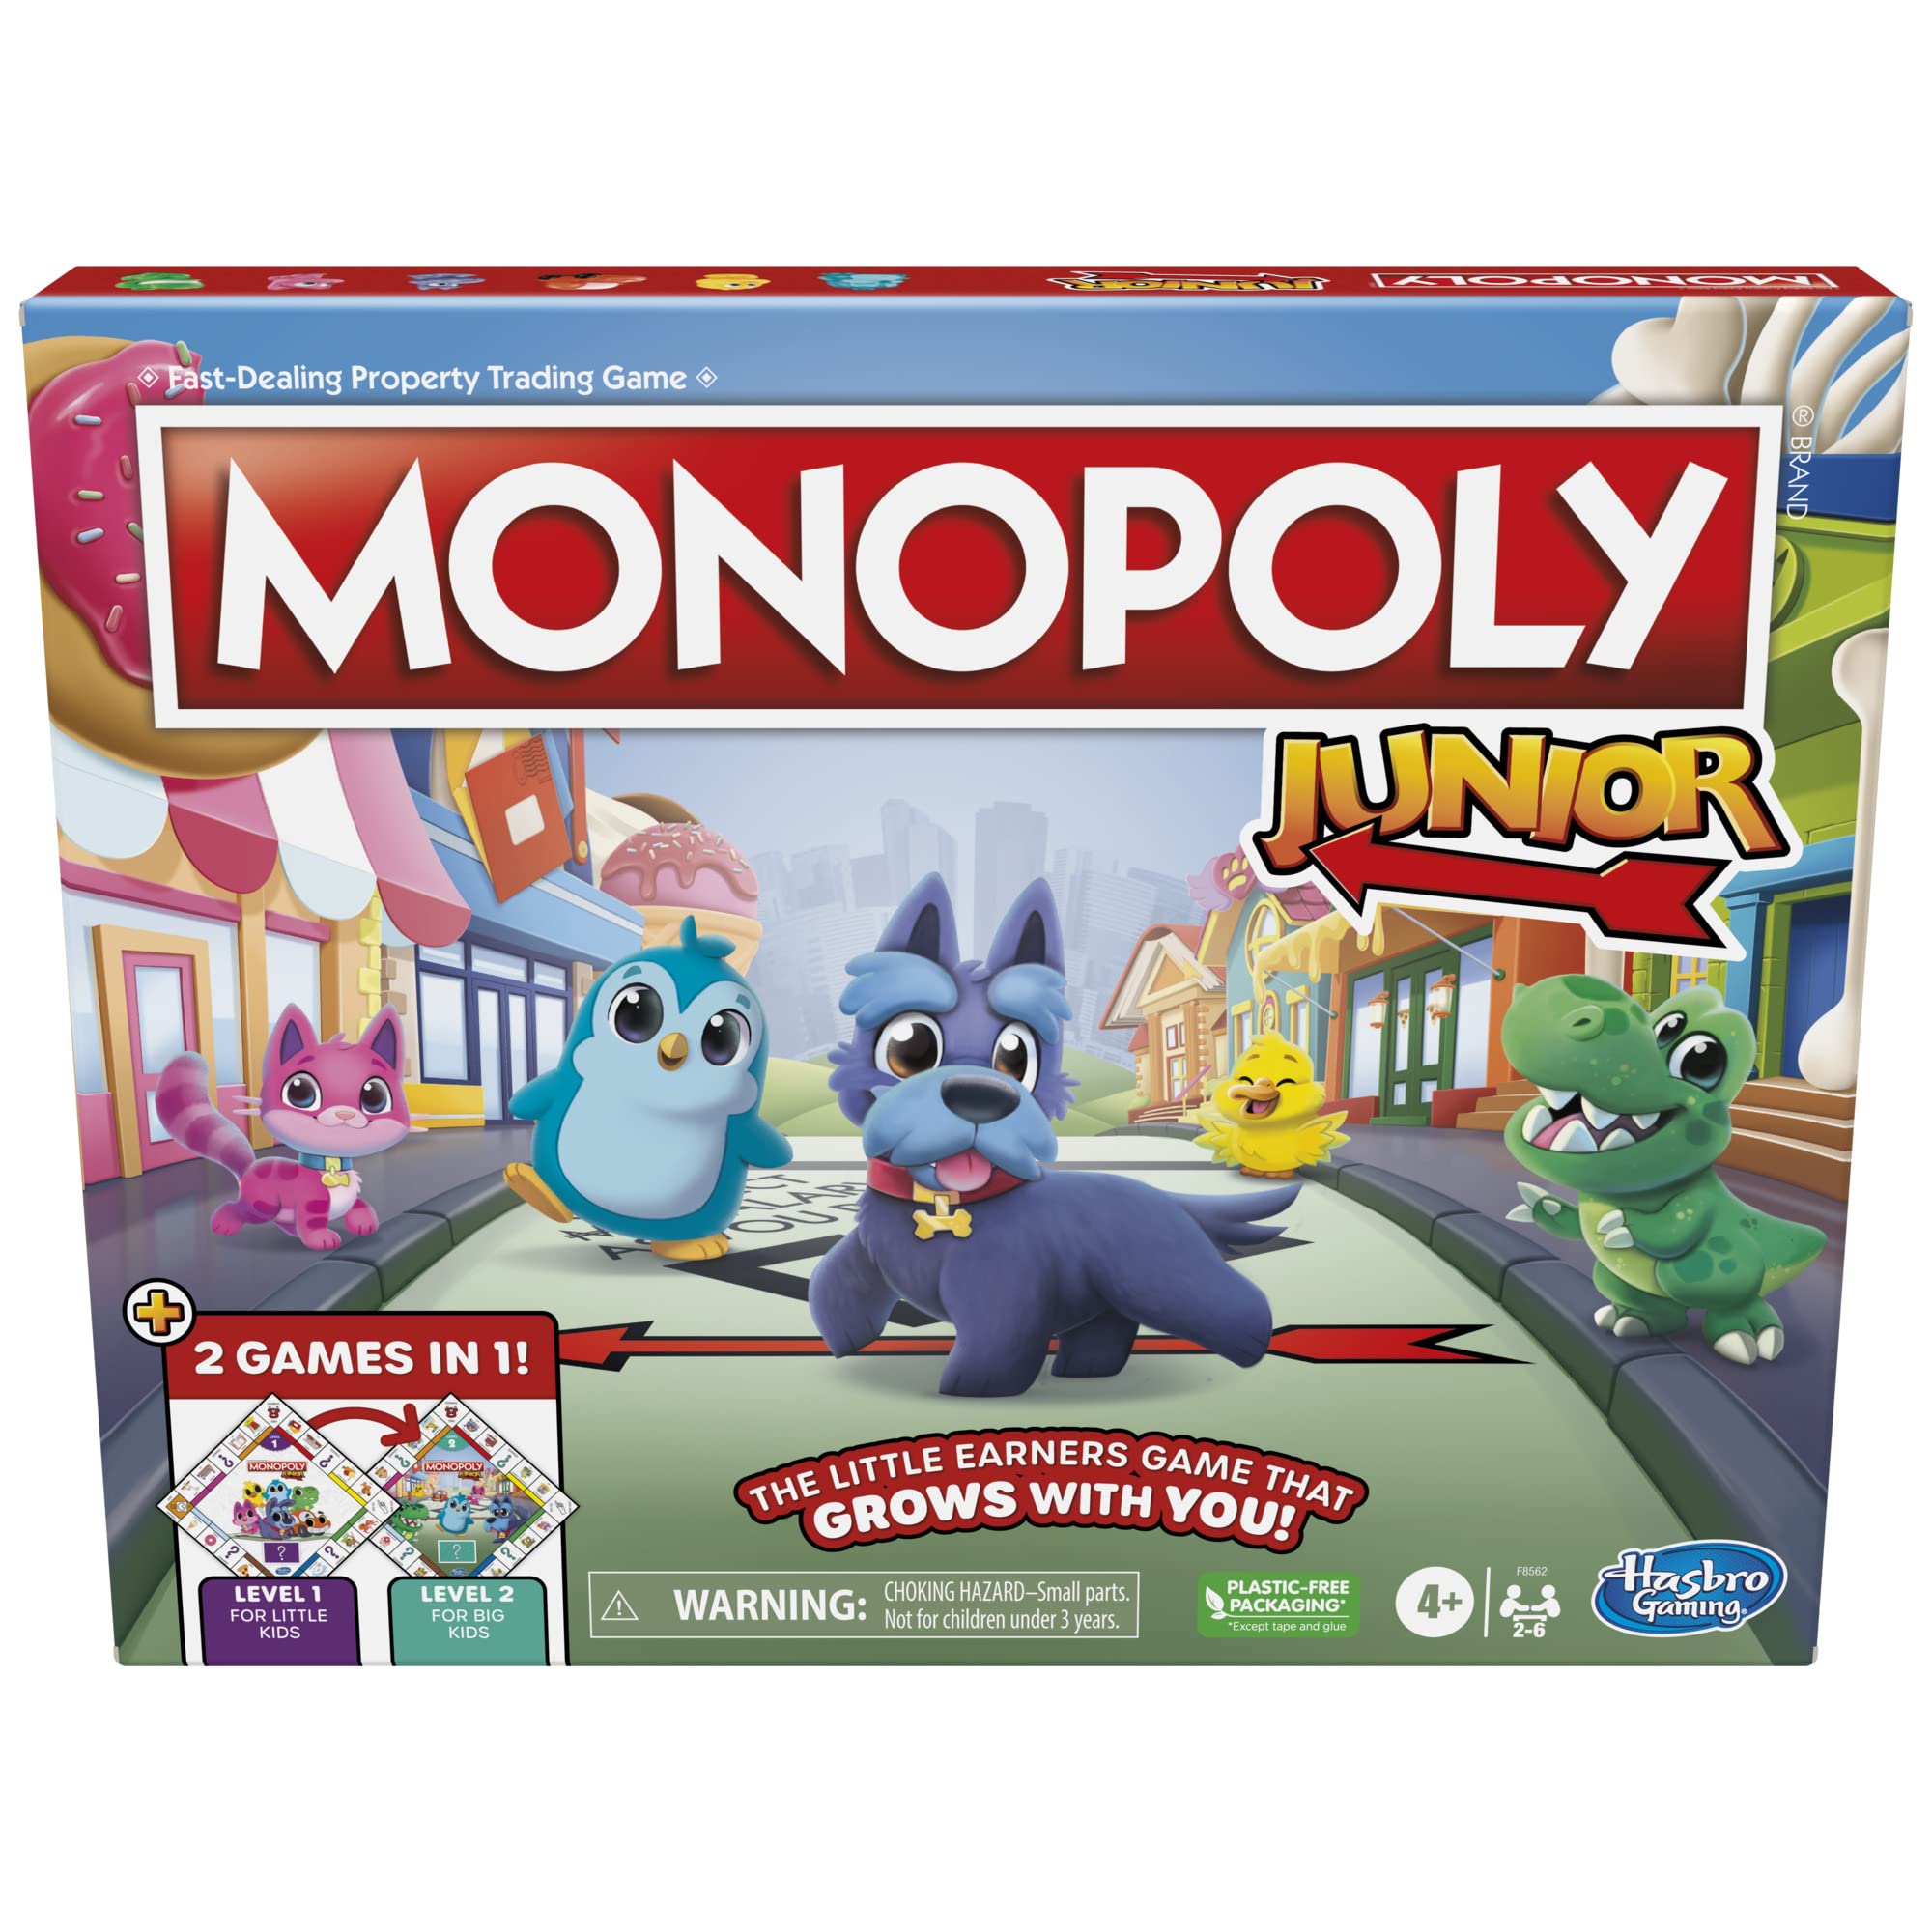 Hasbro Gaming Monopoly Junior Board Game, 2-Sided Gameboard, 2 Games in 1, Monopoly Game for Younger Kids Ages 4 and Up, Kids Games for 2 to 6 Players